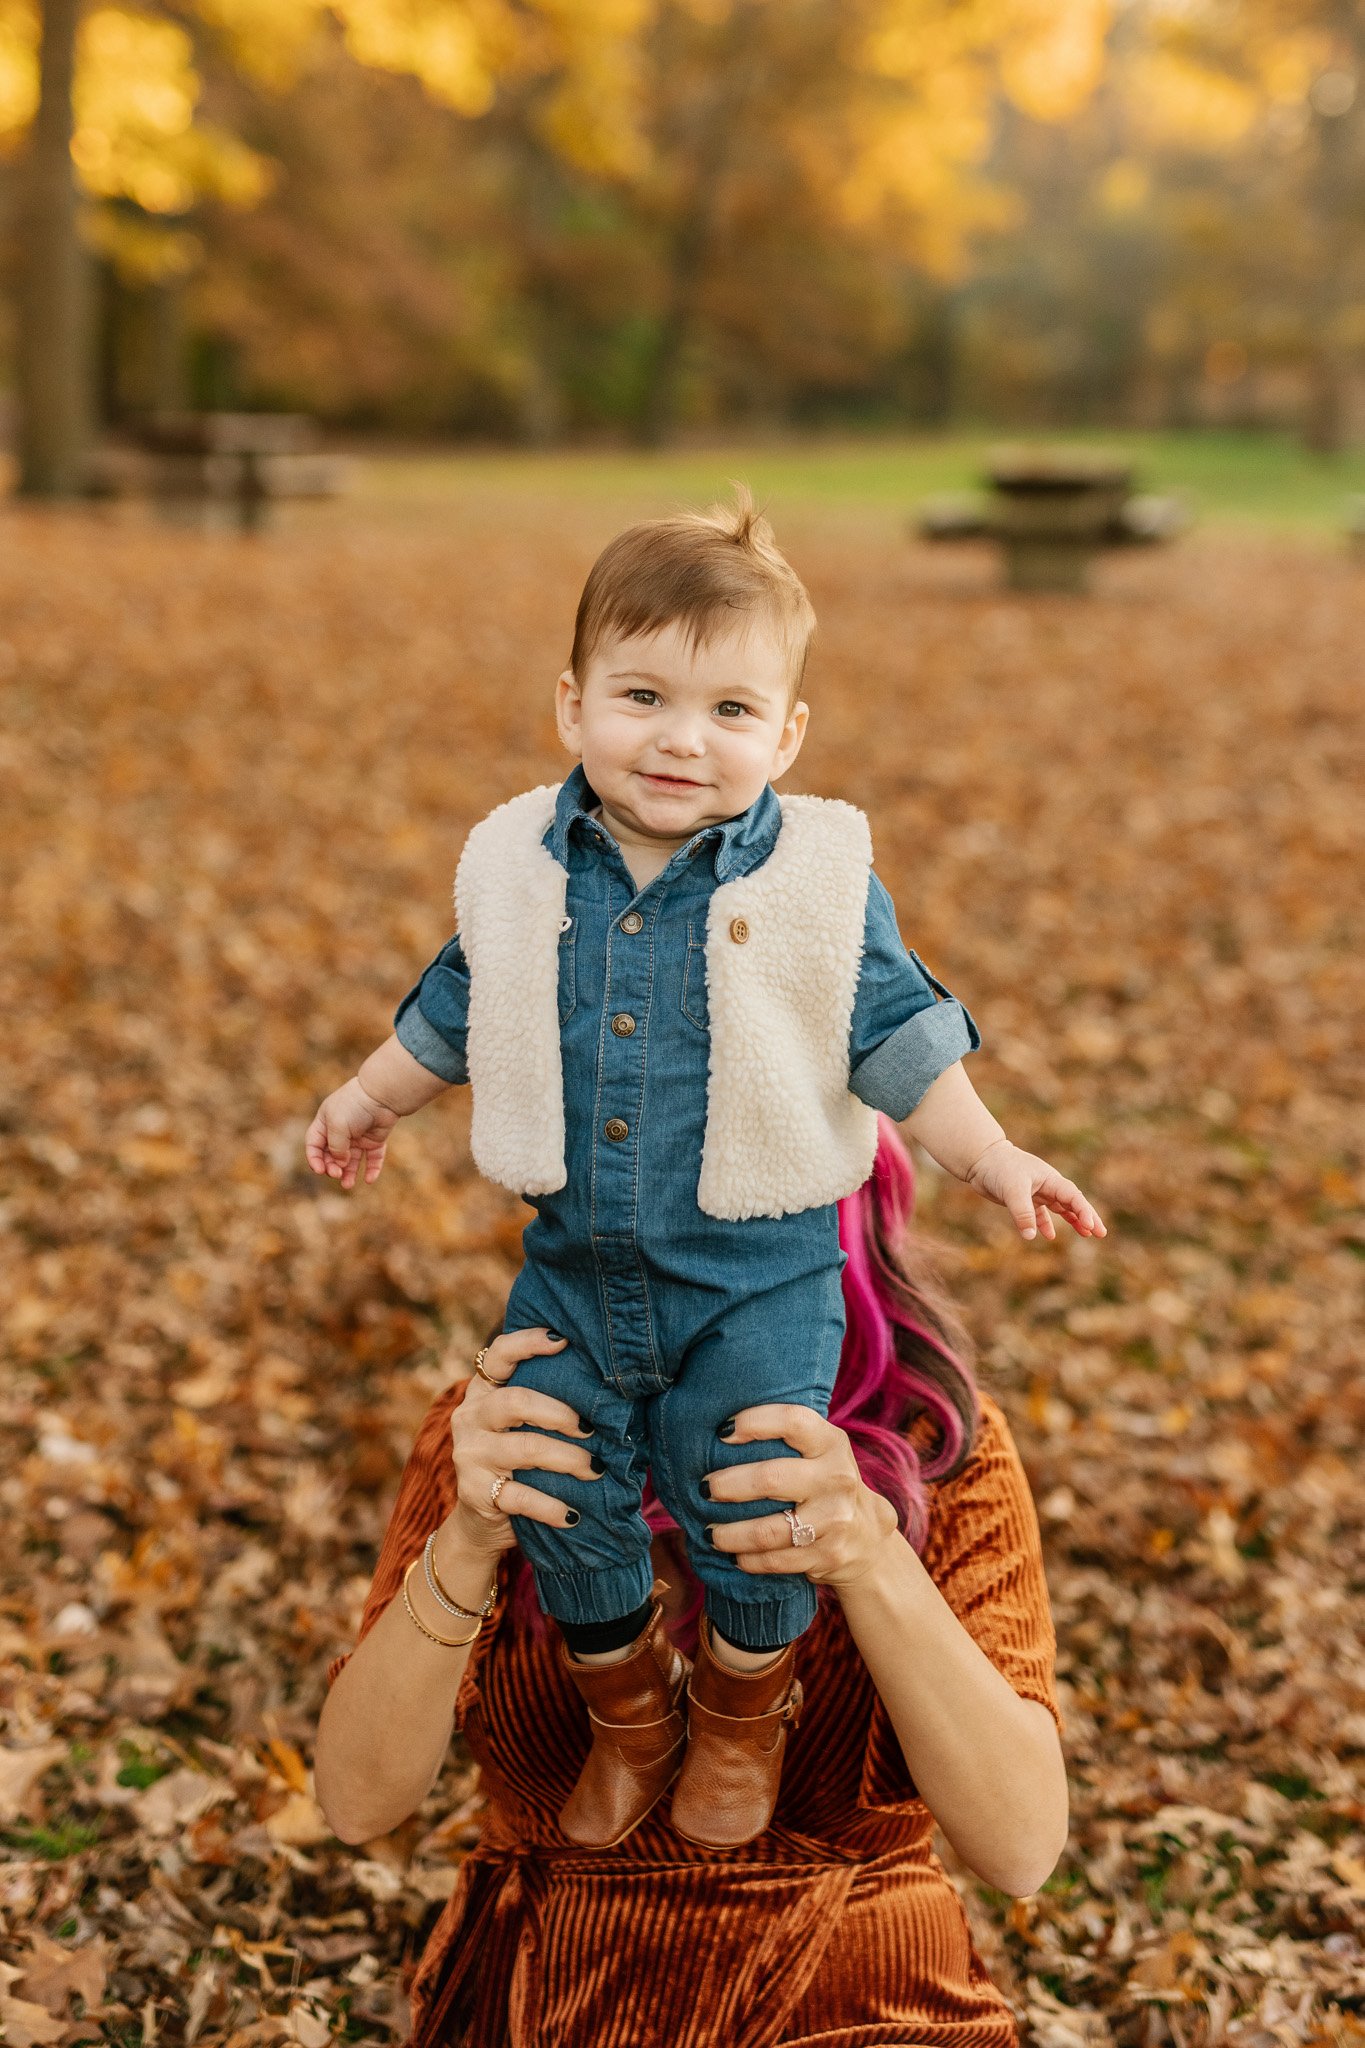  Baby wearing a denim suit and fuzzy vest for fall family photos by Nicole Hawkins Photography. toddler portraits NJ family #NicoleHawkinsPhotography #NicoleHawkinsFamily #fallfamilyphotos #fallphotos #familyphotographerNJ #NJfallfamilypics 